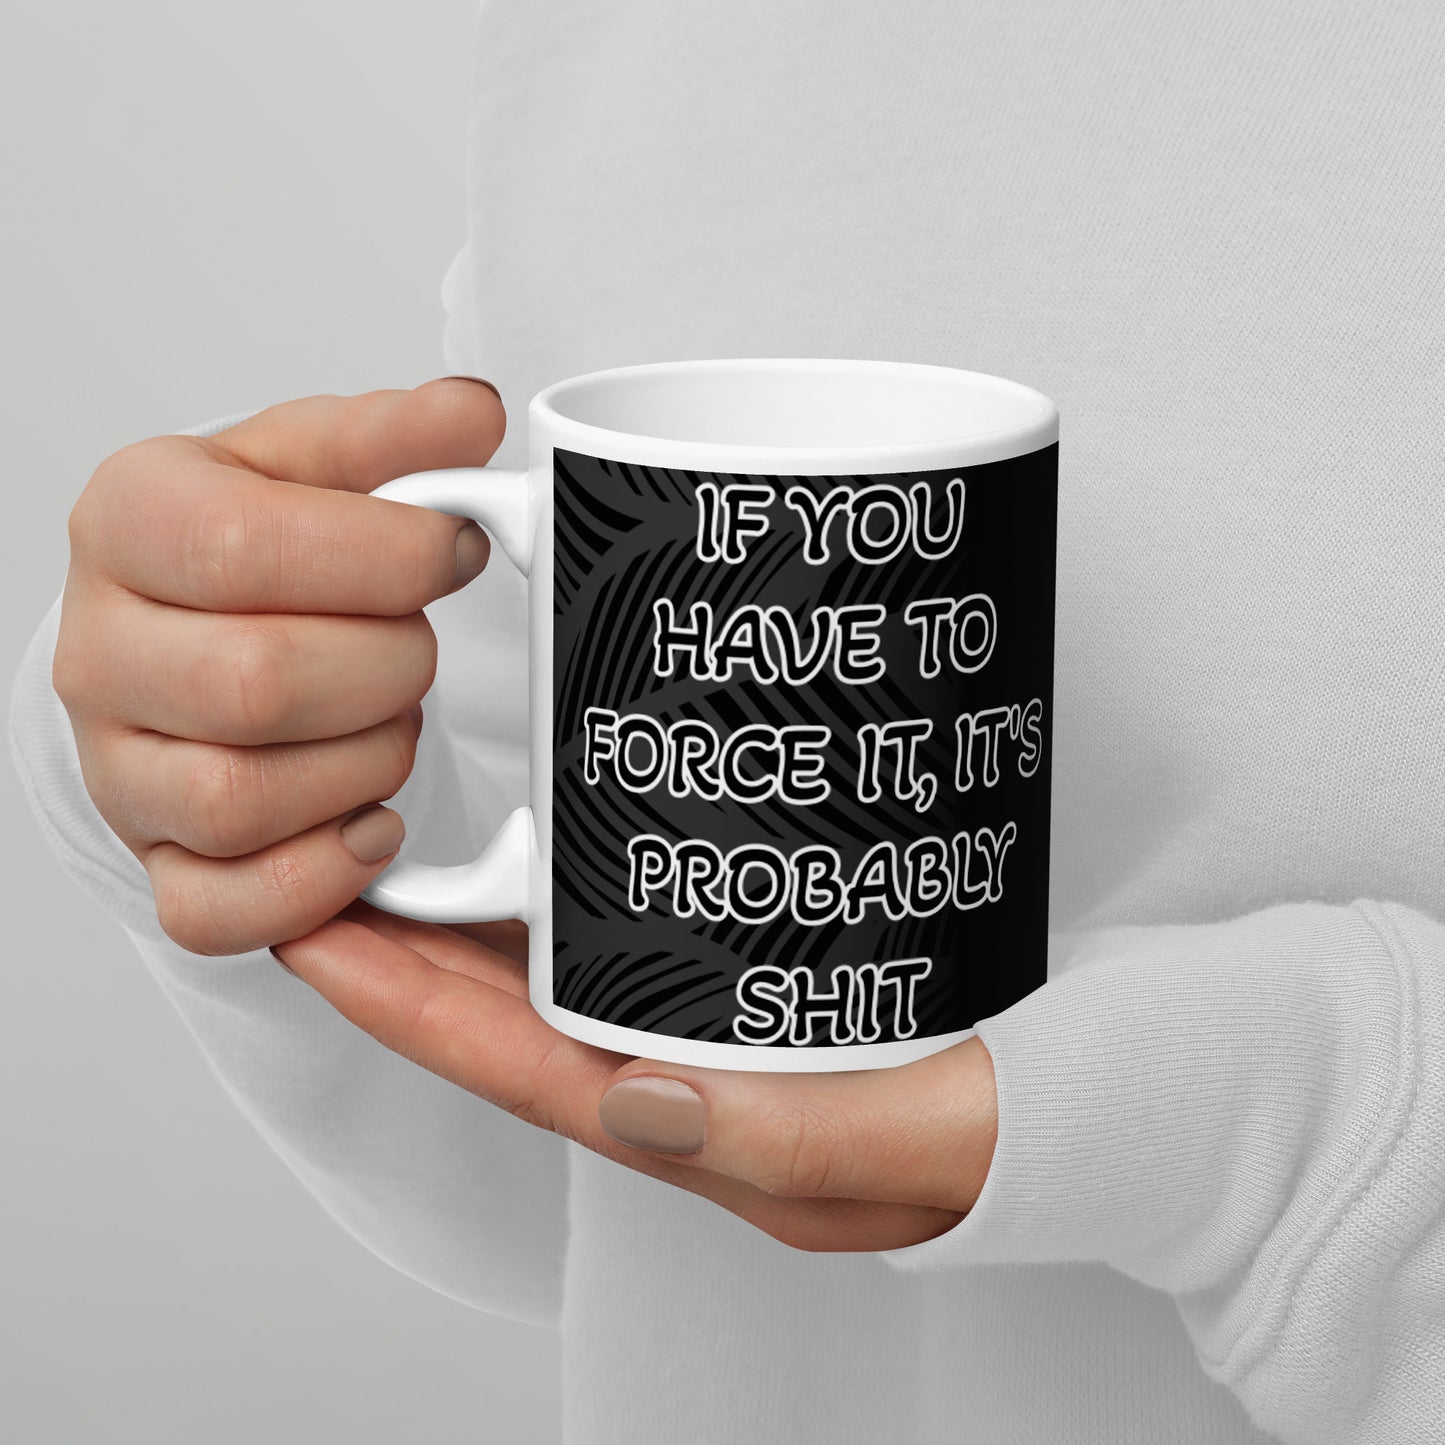 IF YOU HAVE TO FORCE IT, IT'S PROBABLY SHIT- White glossy mug